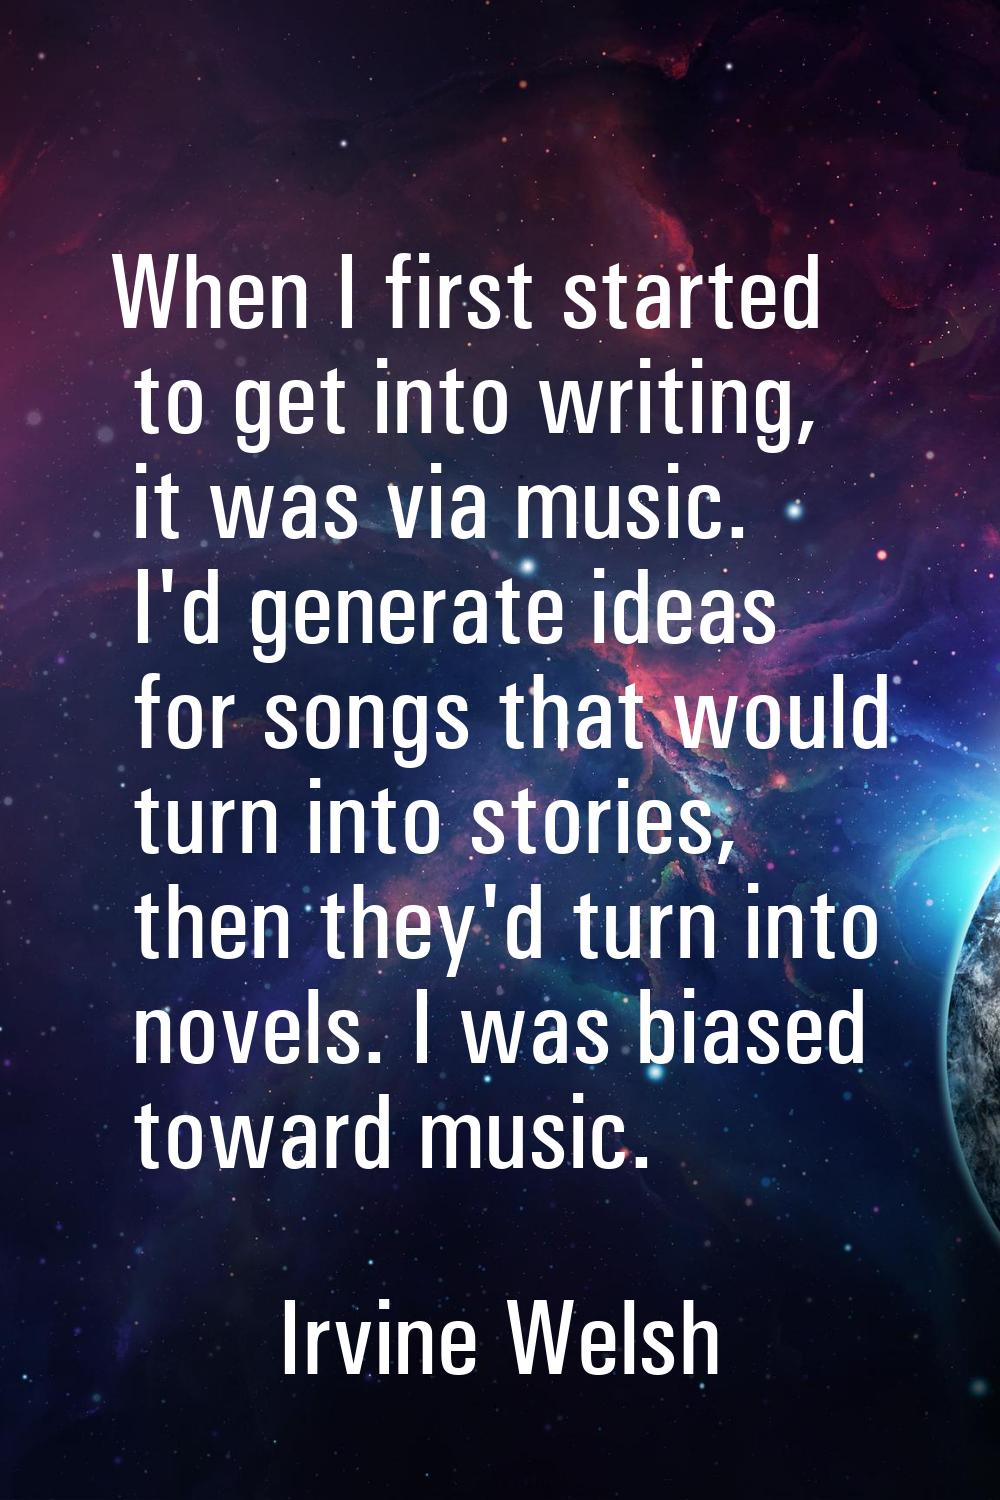 When I first started to get into writing, it was via music. I'd generate ideas for songs that would